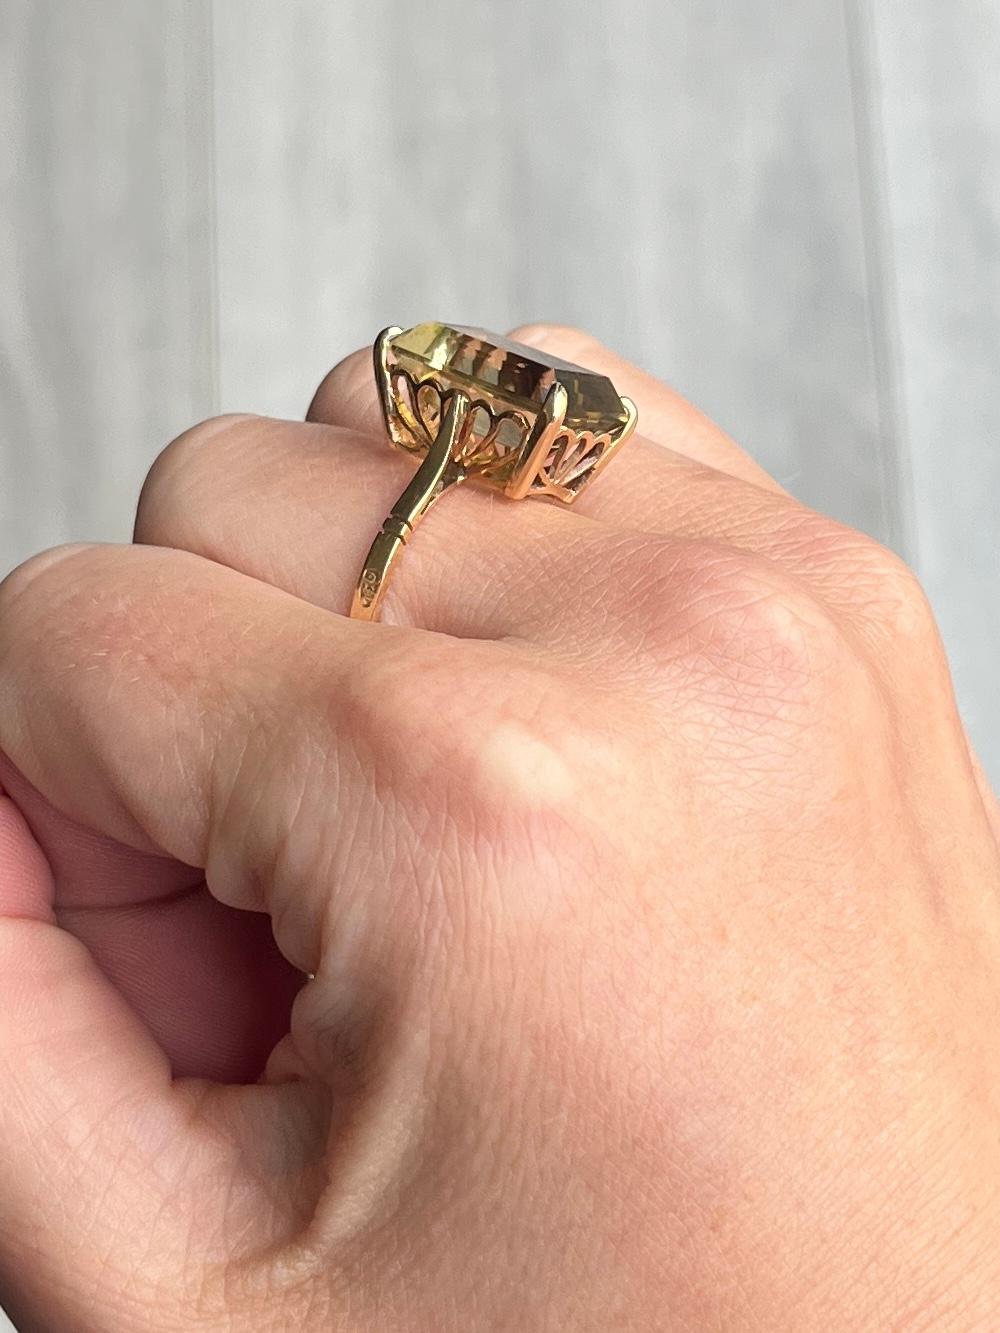 The pale green/yellow tourmaline is gorgeous and set simply up high in this 18 carat gold ring which has simple shoulders.

Ring Size: Q or 8 1/4 
Height Off Finger: 9mm
Stone Diameter: 16x12mm

Weight: 6.1g

